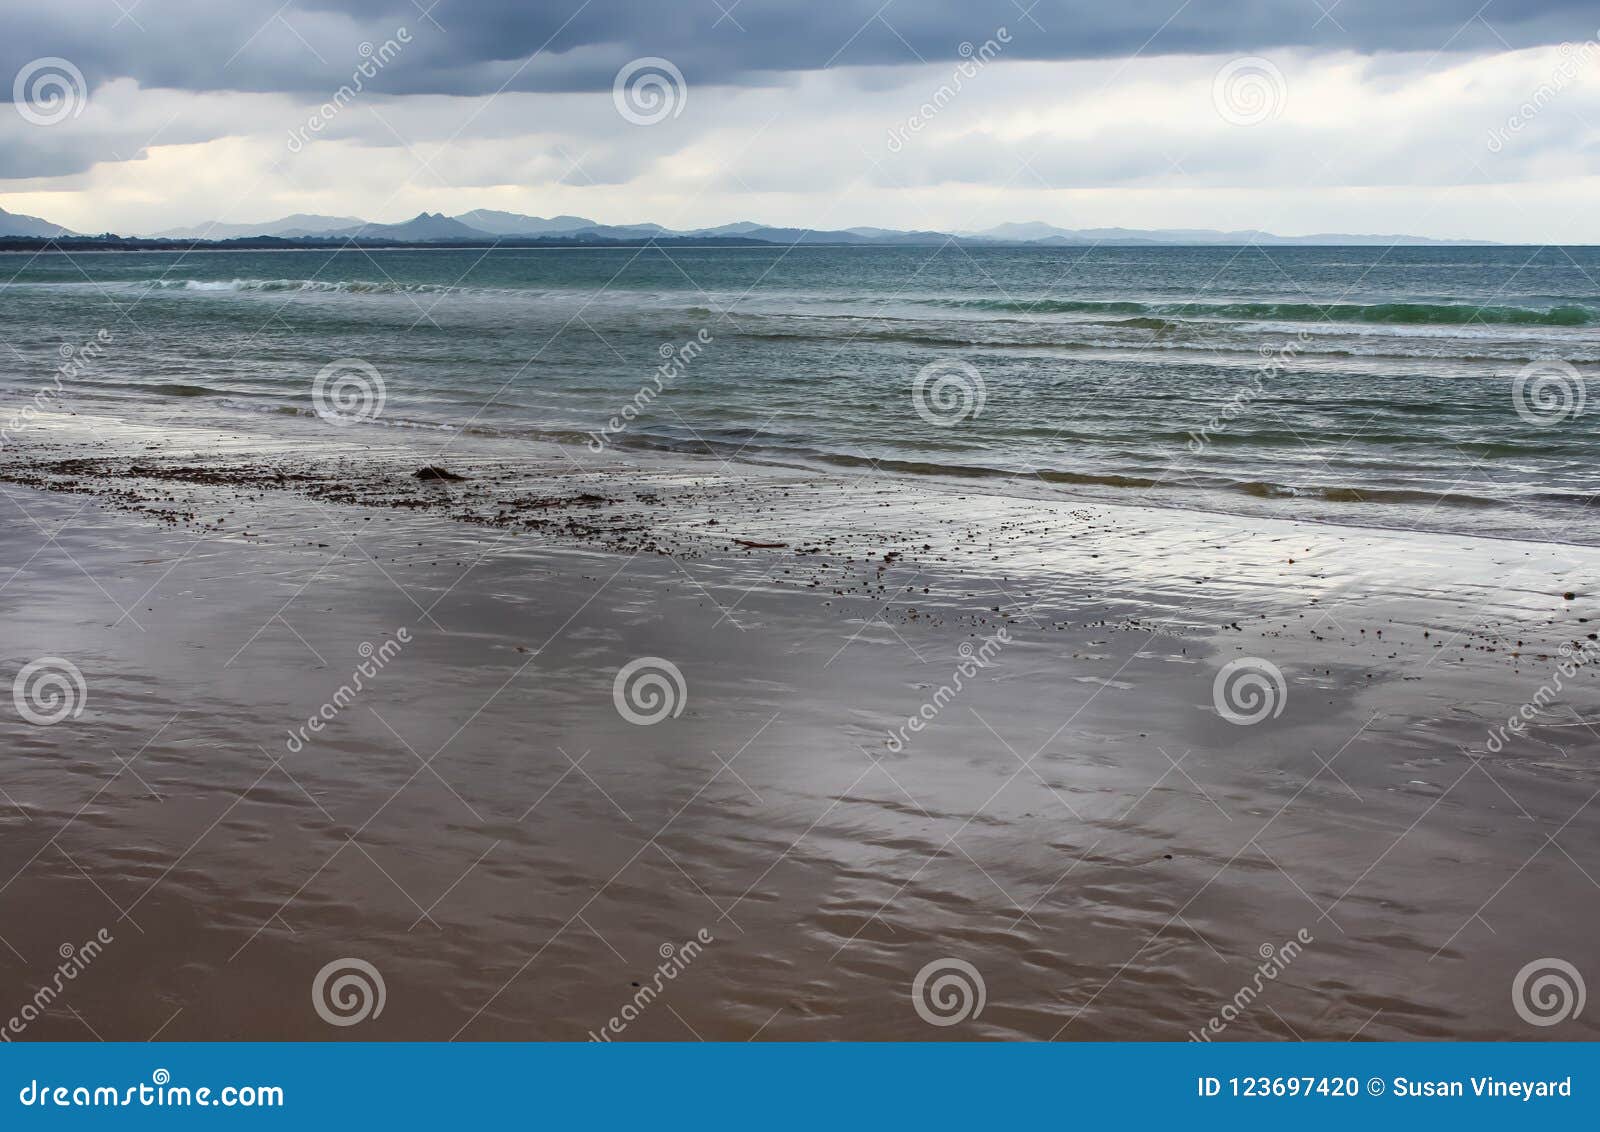 wet beach as the tide recedes with blue mountains ranges in the distance under a stormy sky - byron bay nsw australia